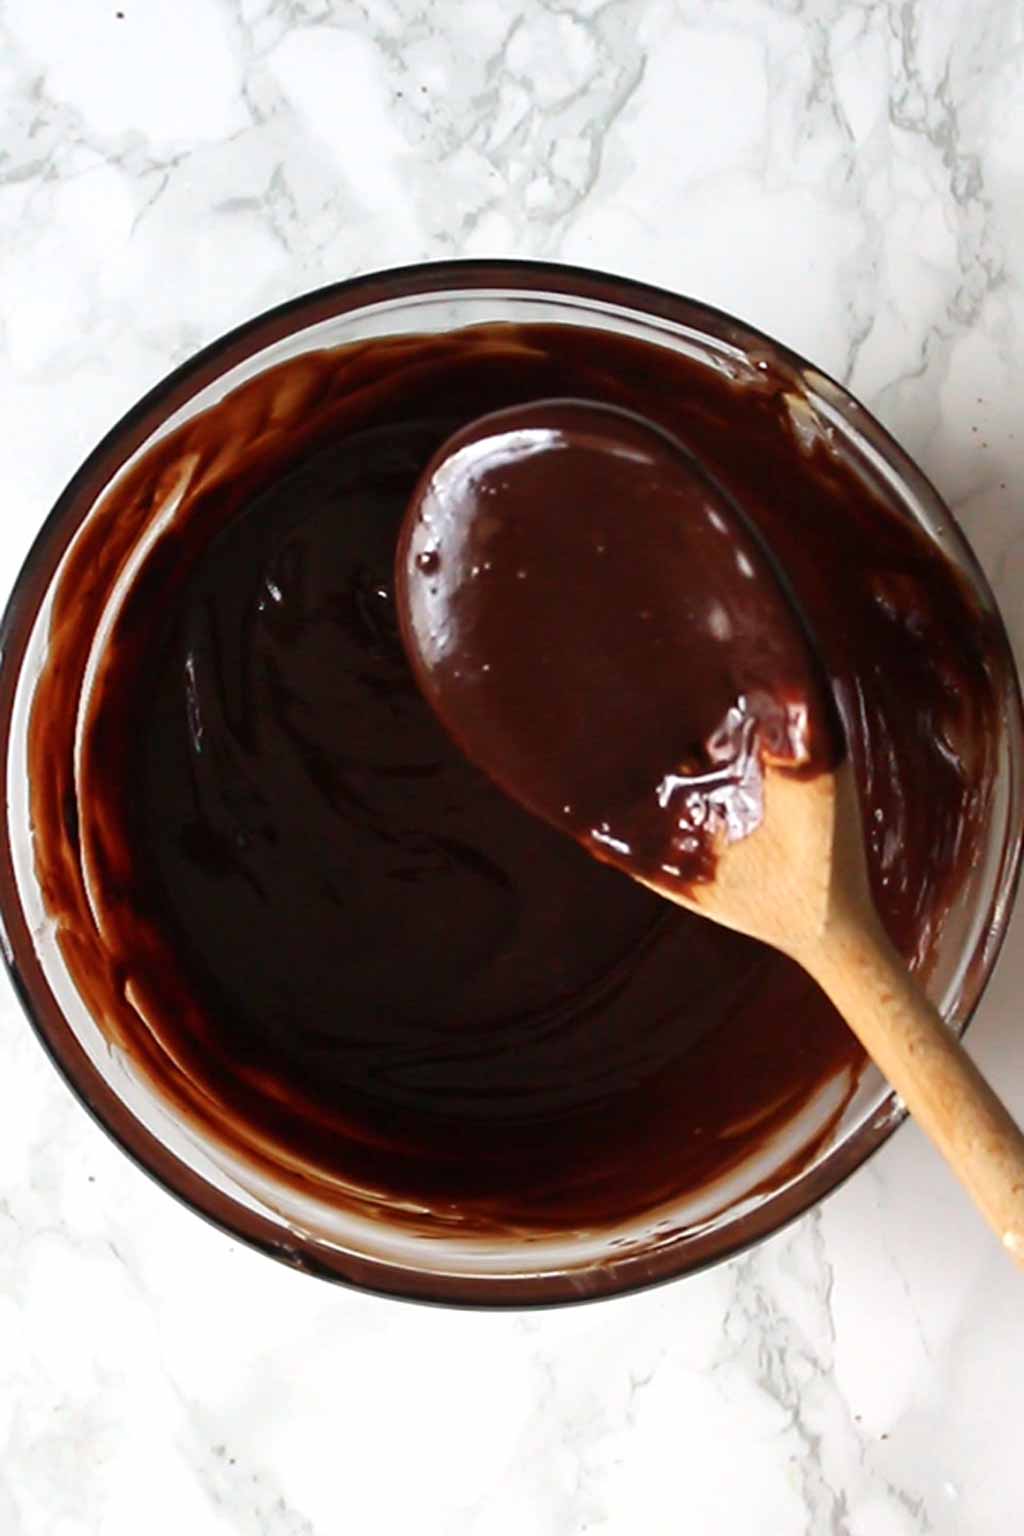 Melted chocolate, butter and golden syrup in a bowl